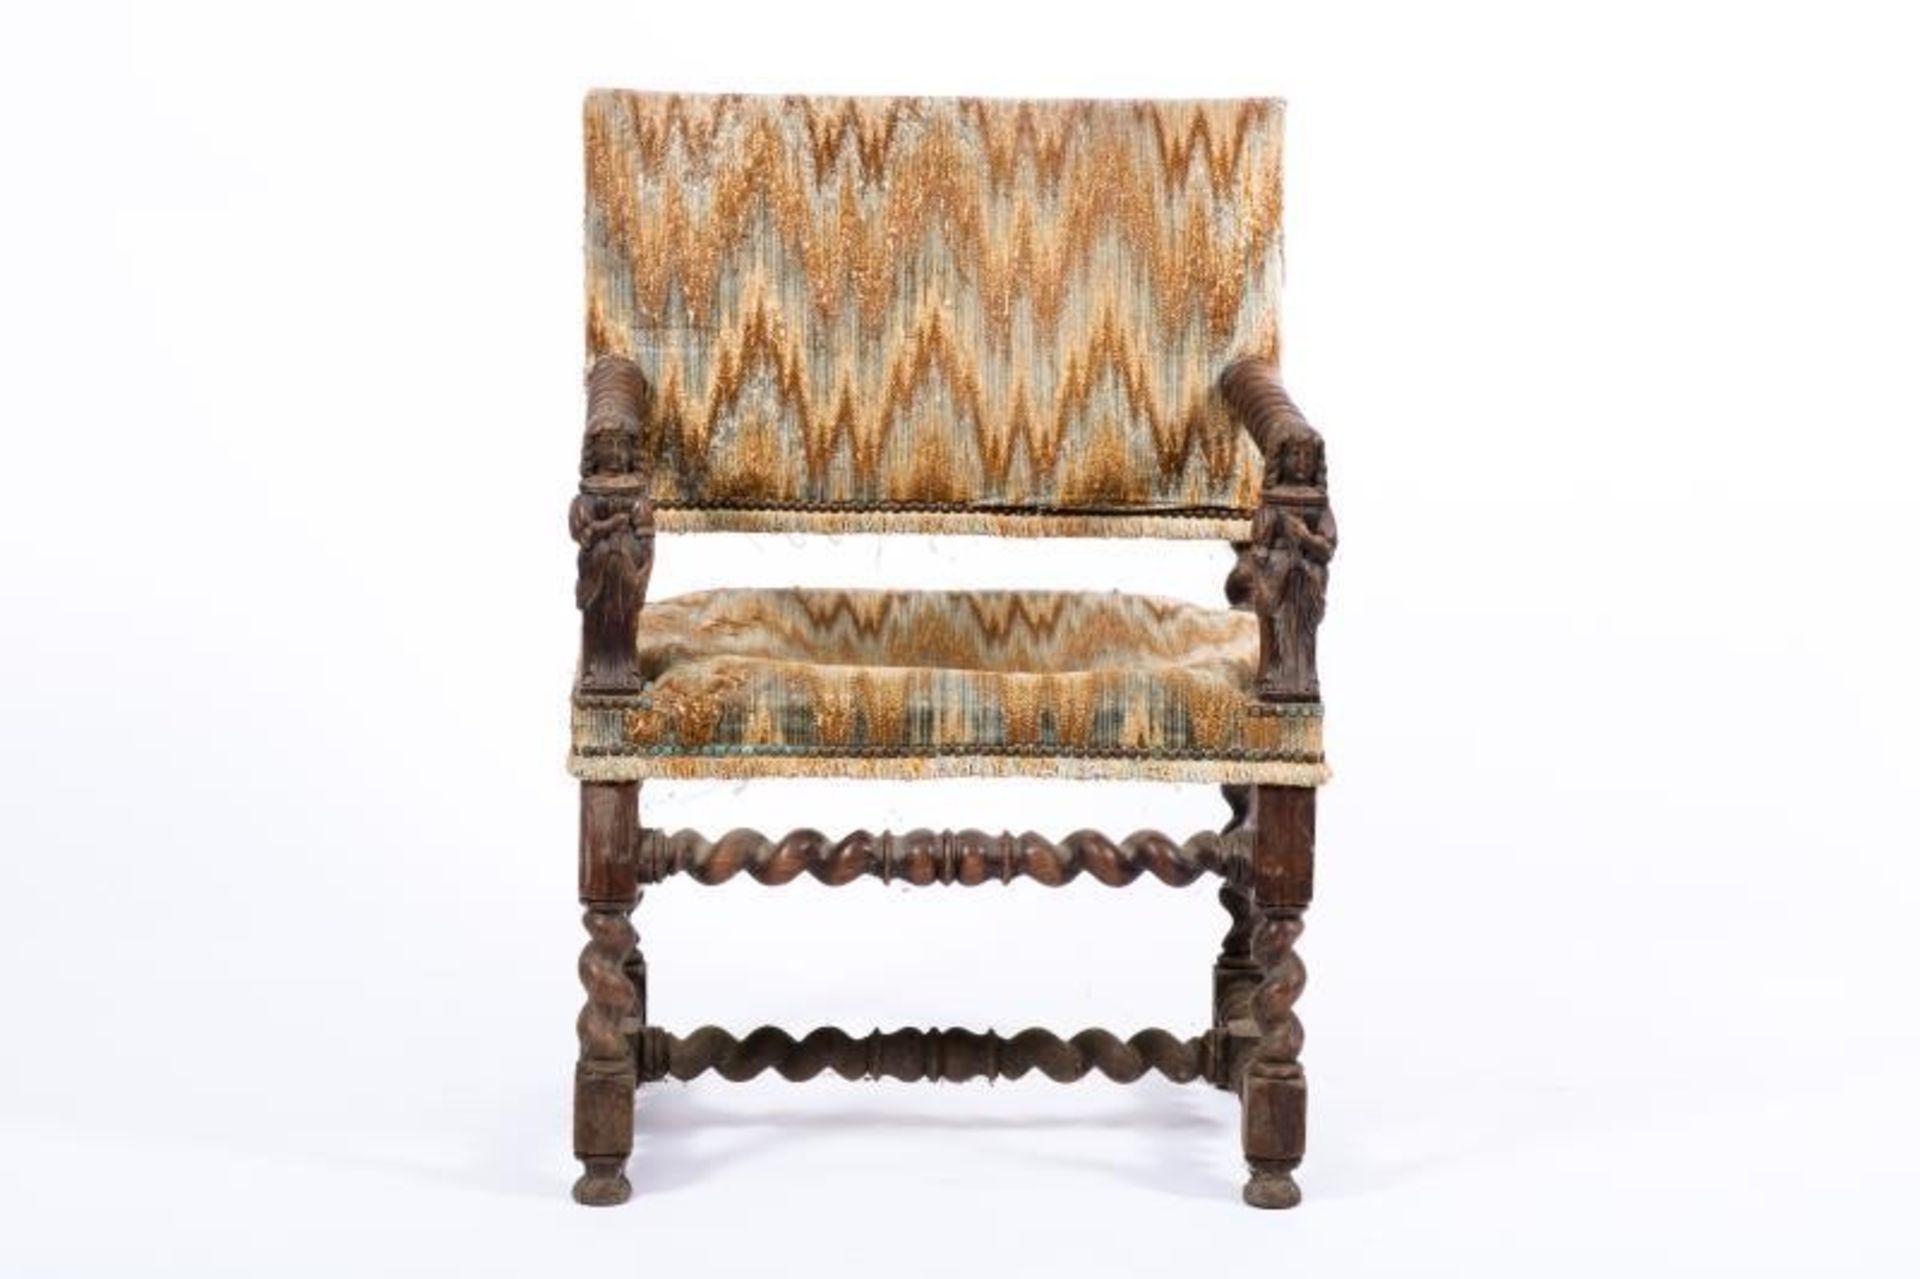 A nutwood armchair in 17th century style, The Netherlands, ca. 1900. - Image 2 of 3